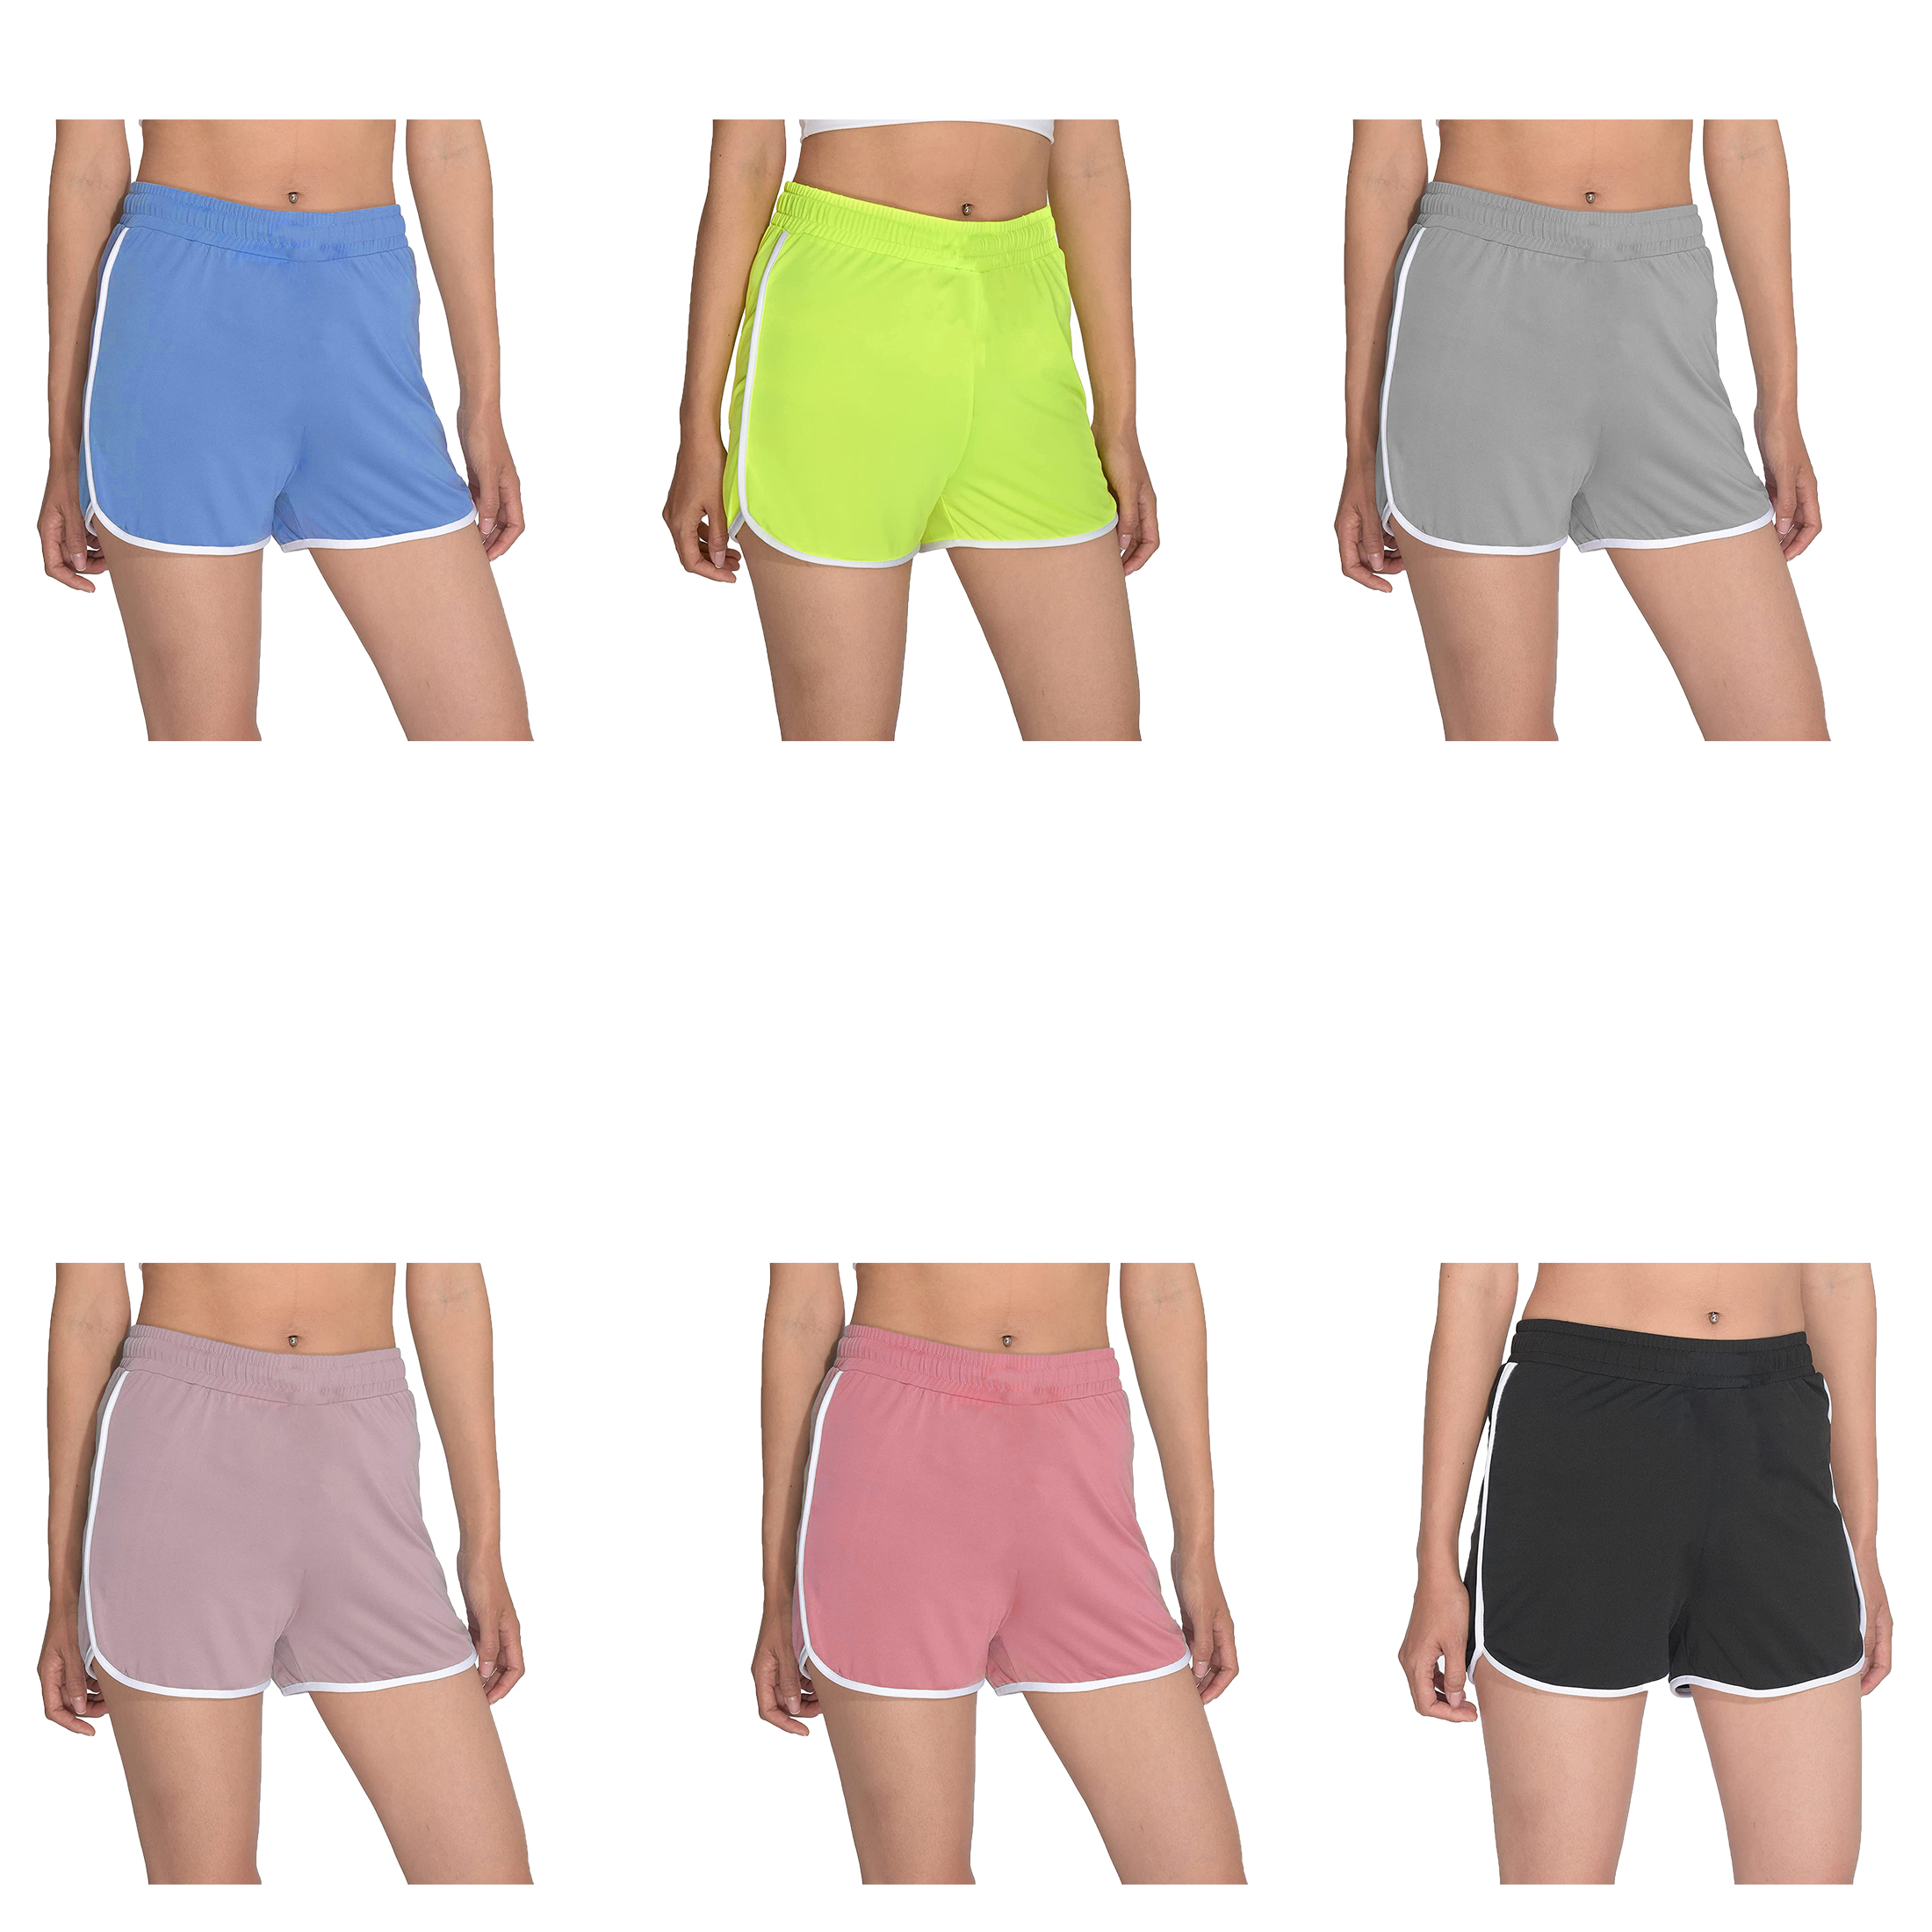 5-Pack Women's Dolphin Shorts Elastic Waist Soft Comfy Running Sporty Athletic Workout Pants - L